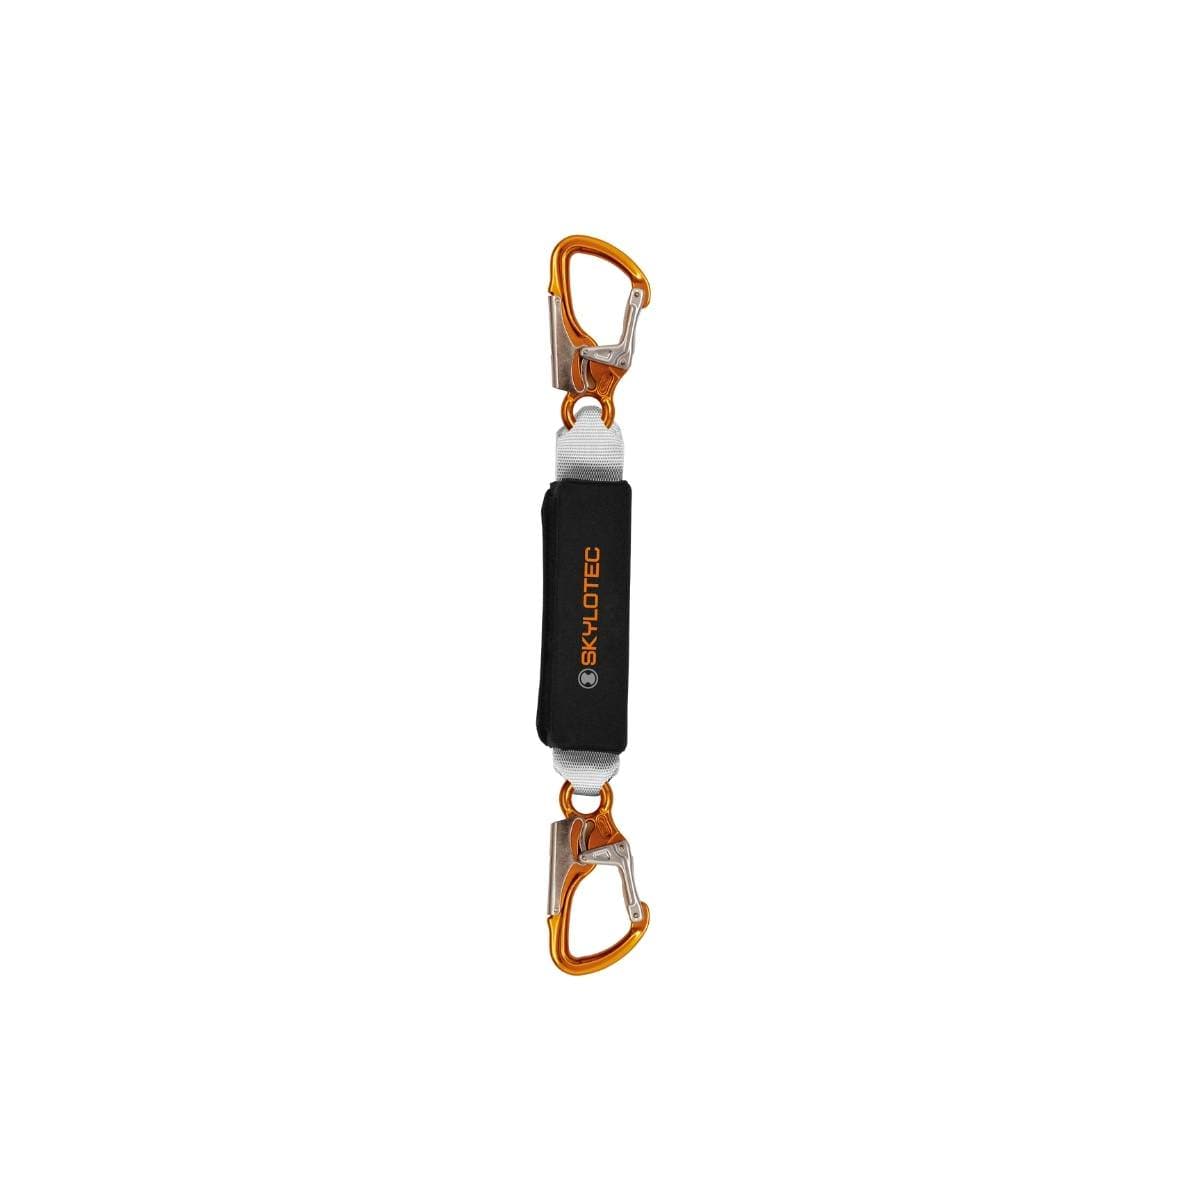 Skylotec BFD Shock Pack 0.3M L-AUS-0005-AT